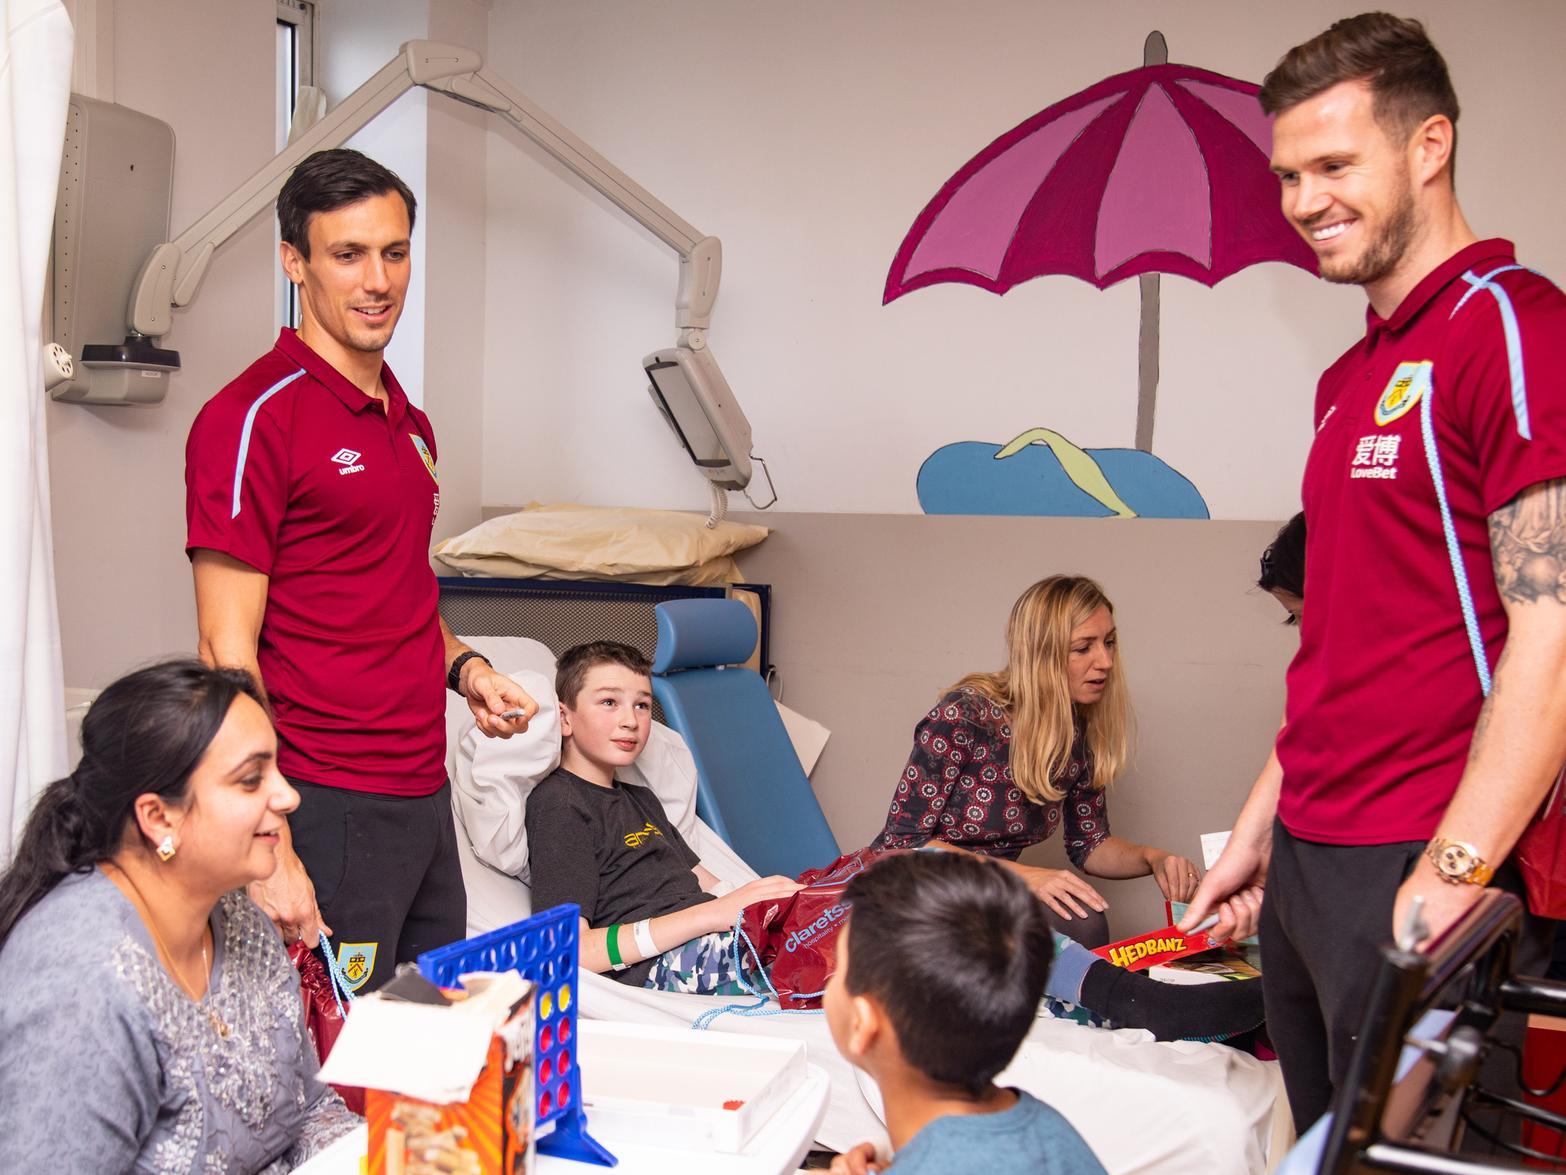 Burnley FC players and staff during their hospital visit. Photo: Burnley Football Club